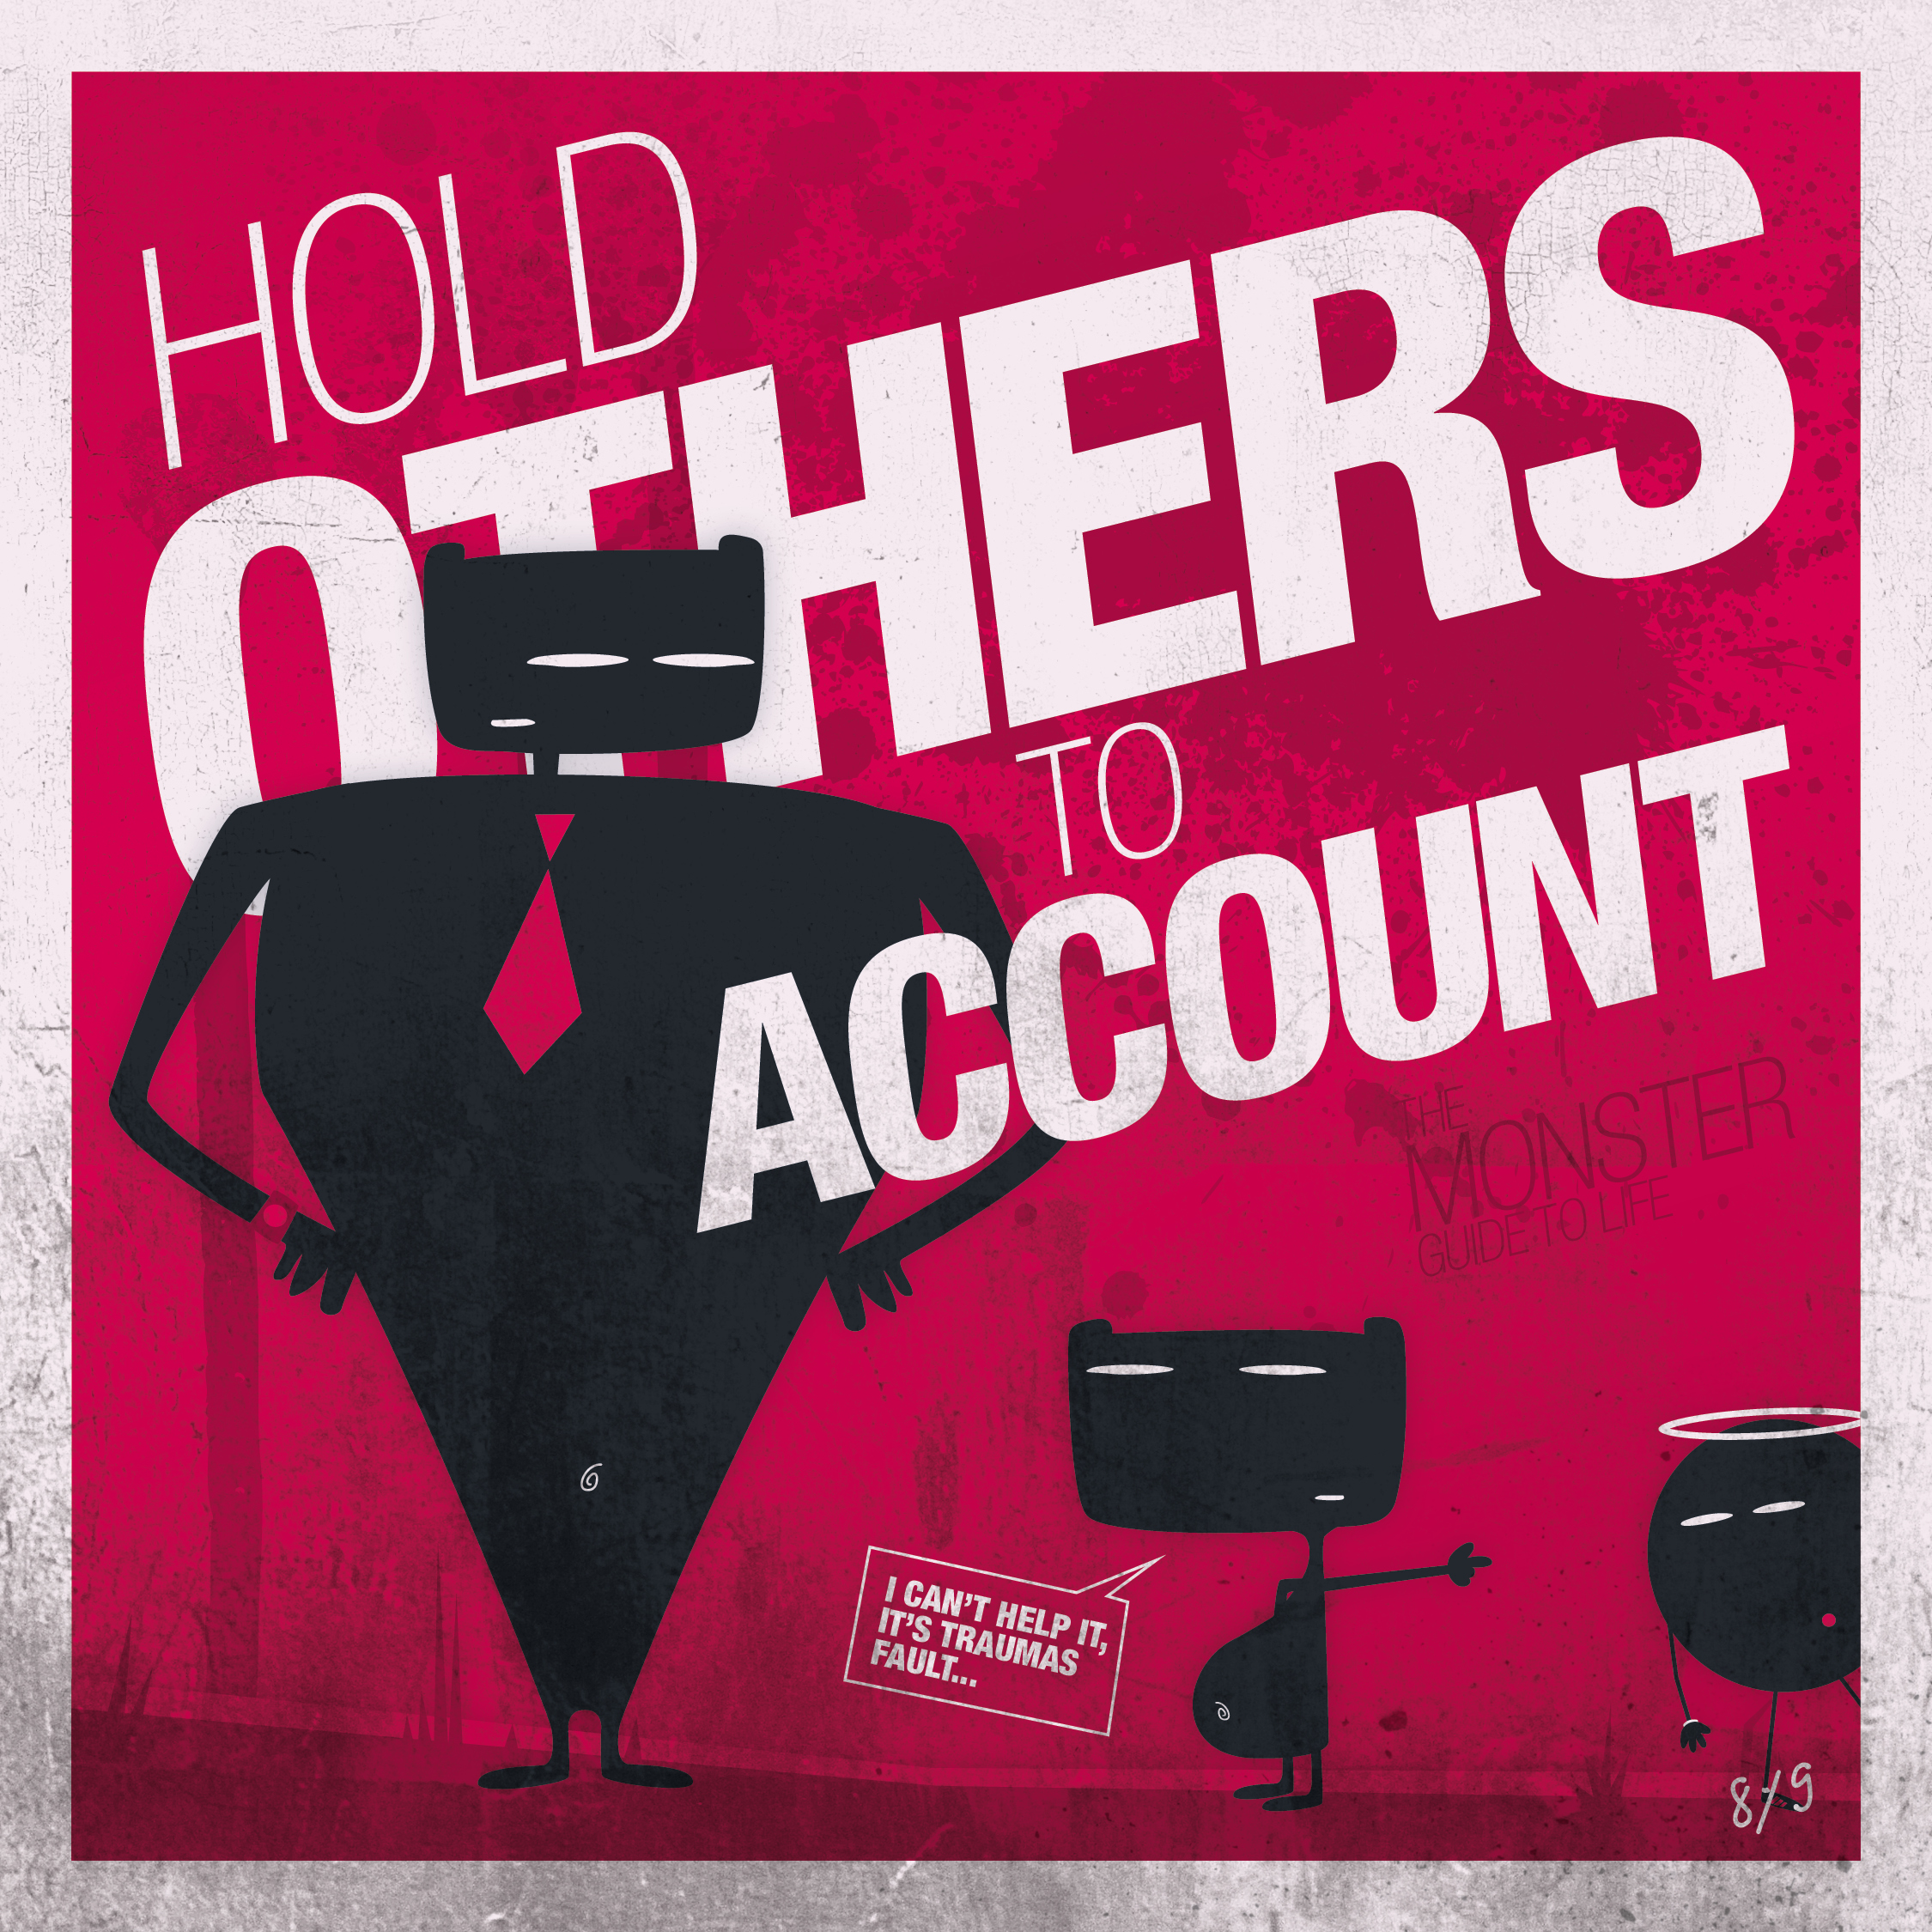 Hold others to account